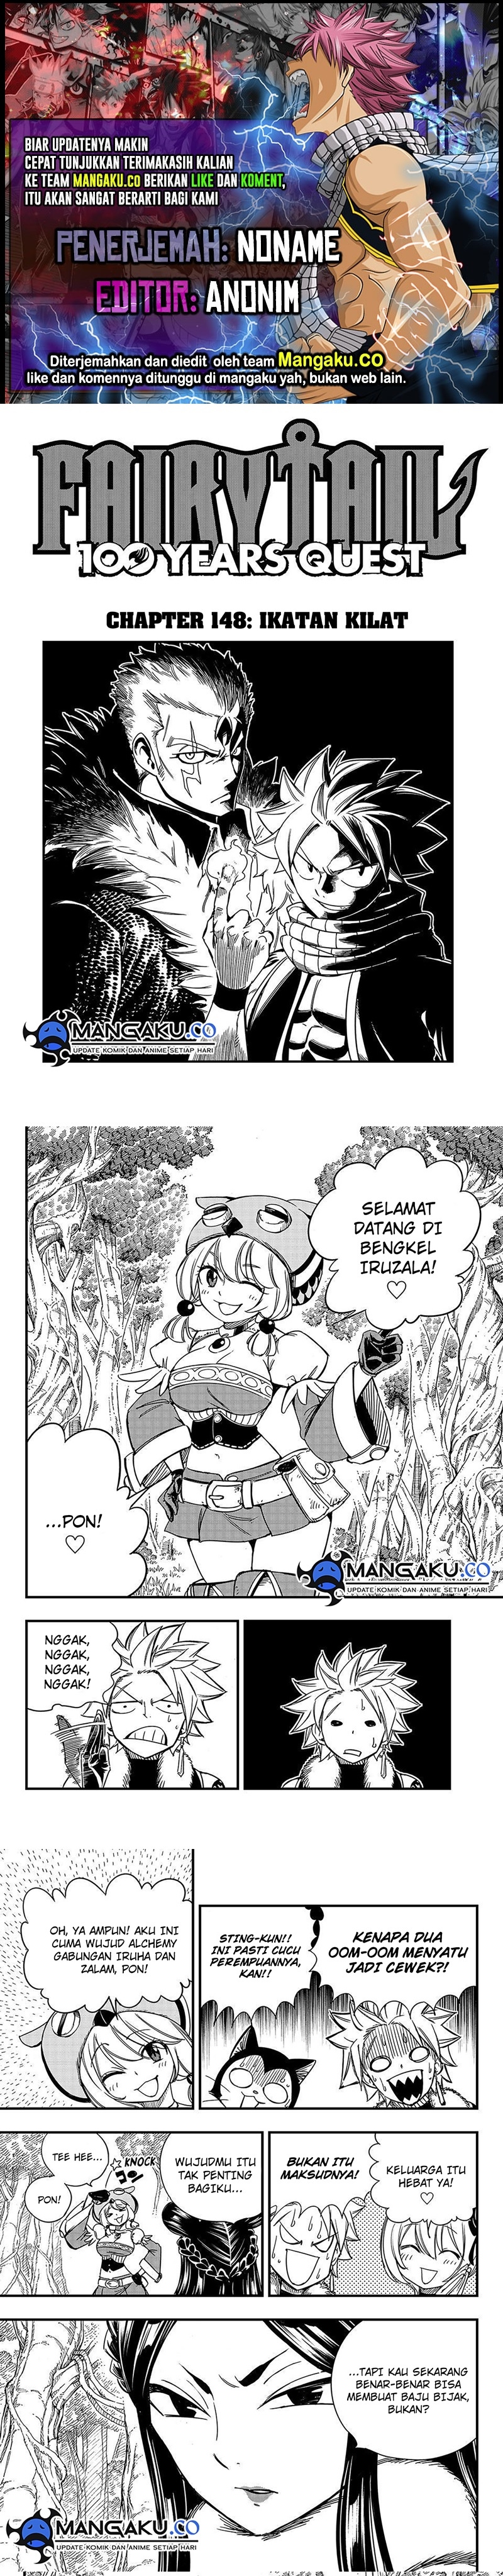 Fairy Tail: 100 Years Quest: Chapter 148 - Page 1